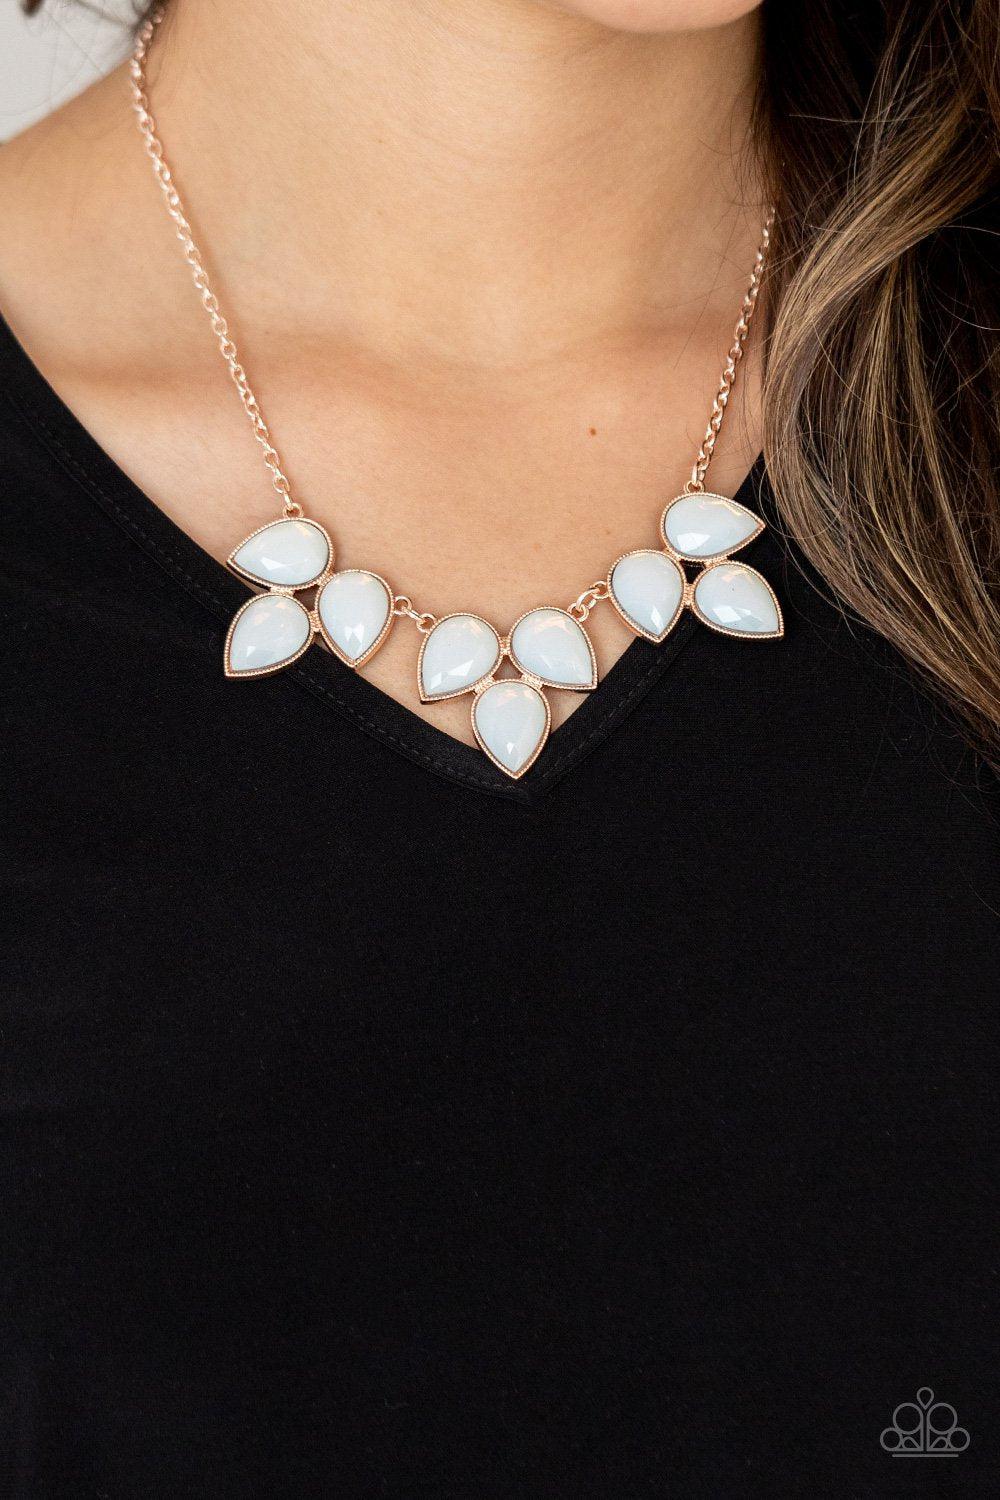 Prairie Fairytale Rose Gold and Iridescent White Necklace - Paparazzi Accessories- lightbox - CarasShop.com - $5 Jewelry by Cara Jewels